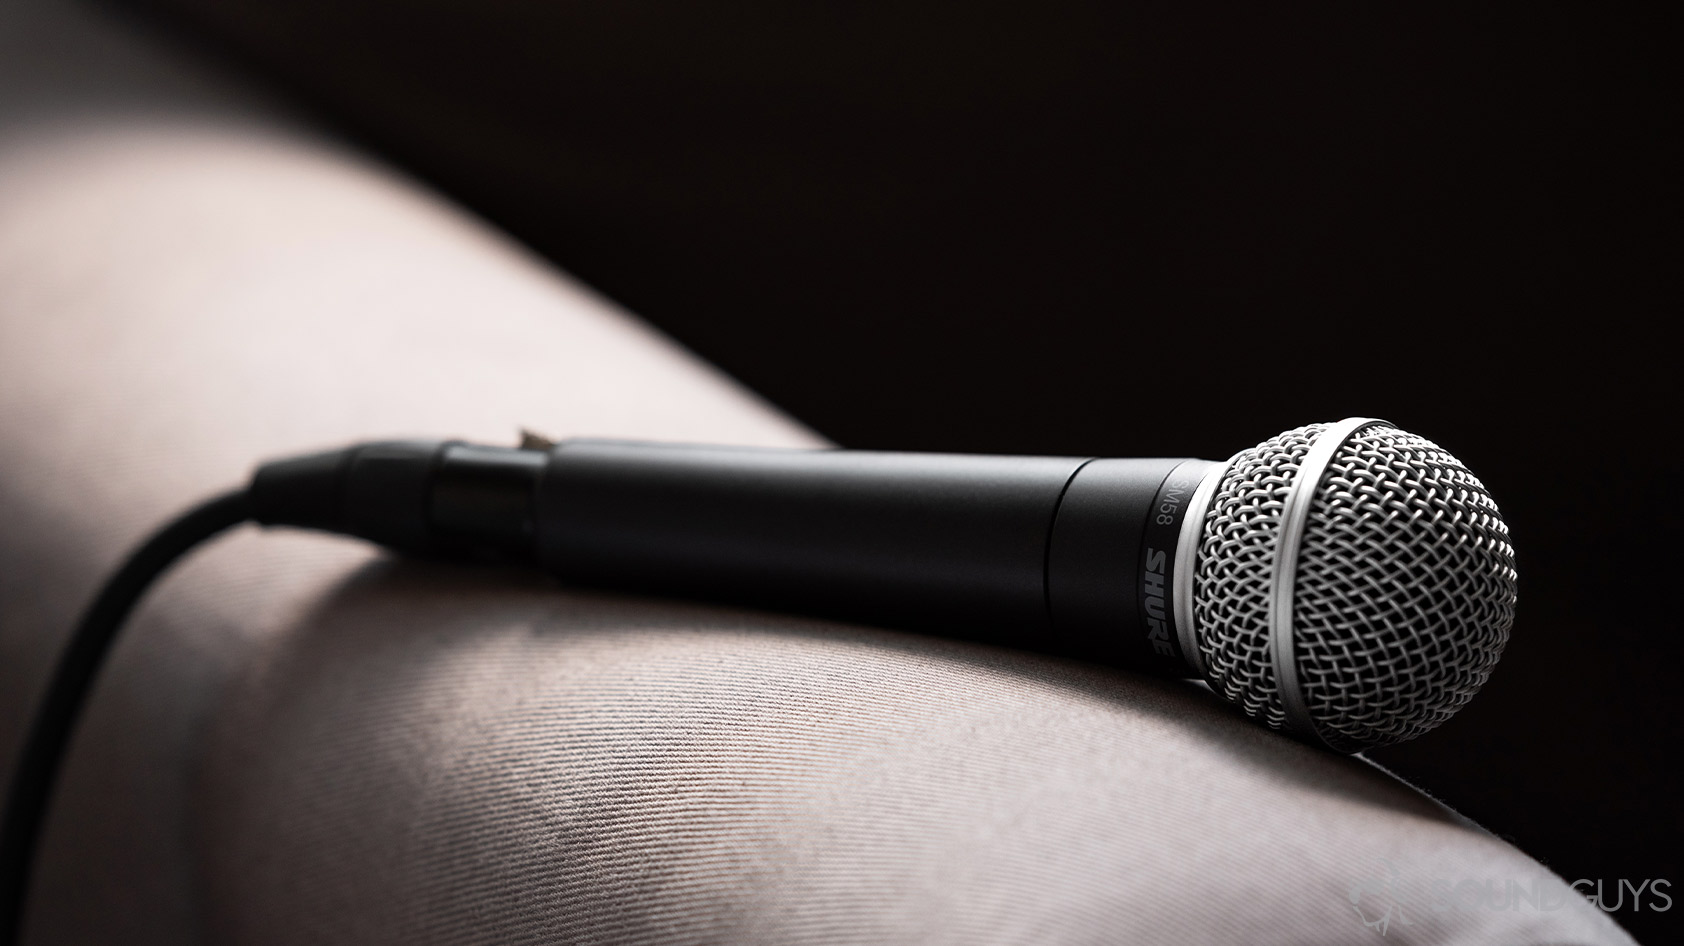 A photo of the Shure SM58 on the arm of a couch.